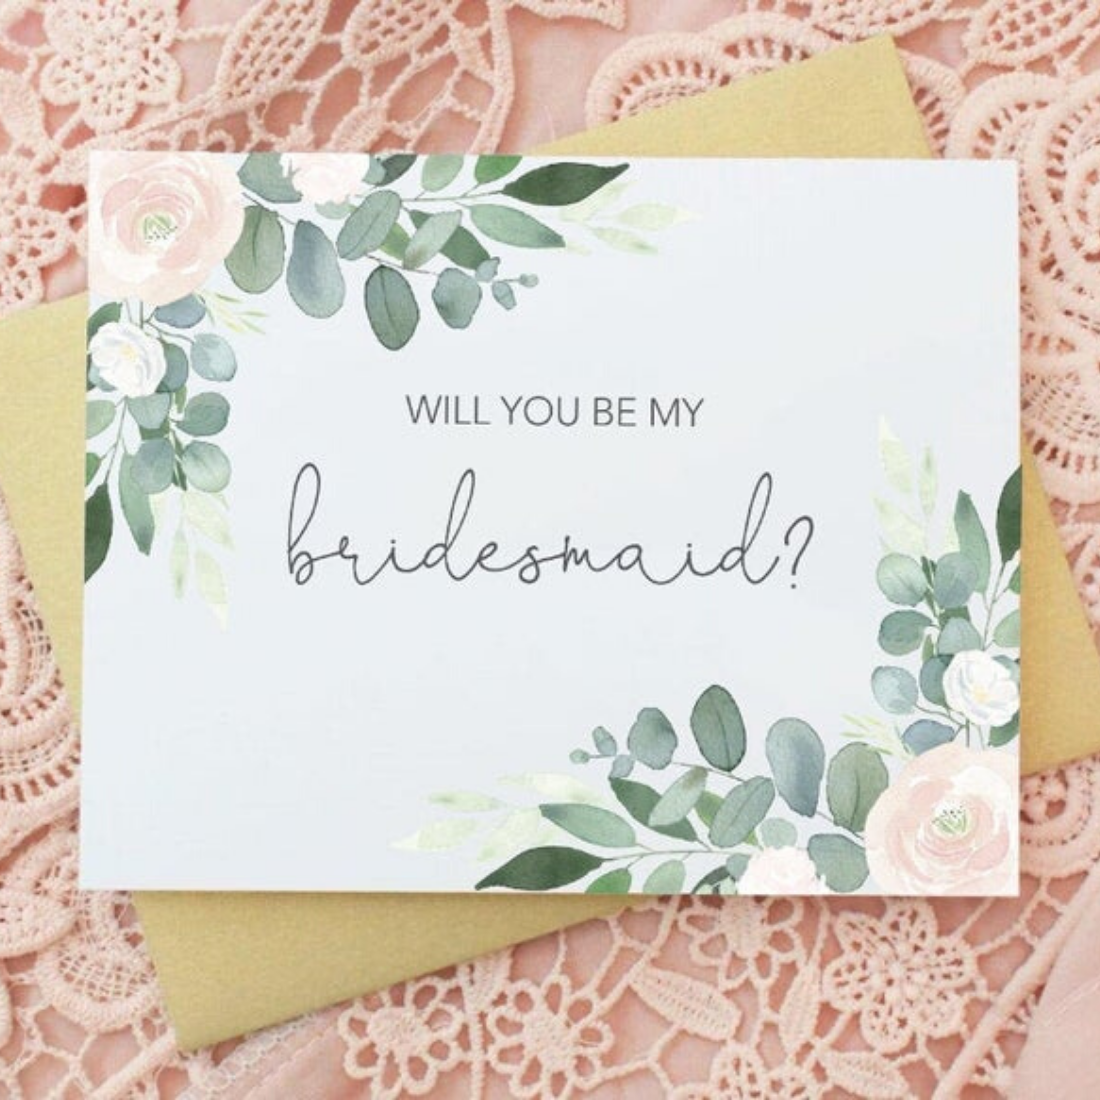 Will you be my Bridesmaid in Floral Wedding Party Card Pertaining To Will You Be My Bridesmaid Card Template